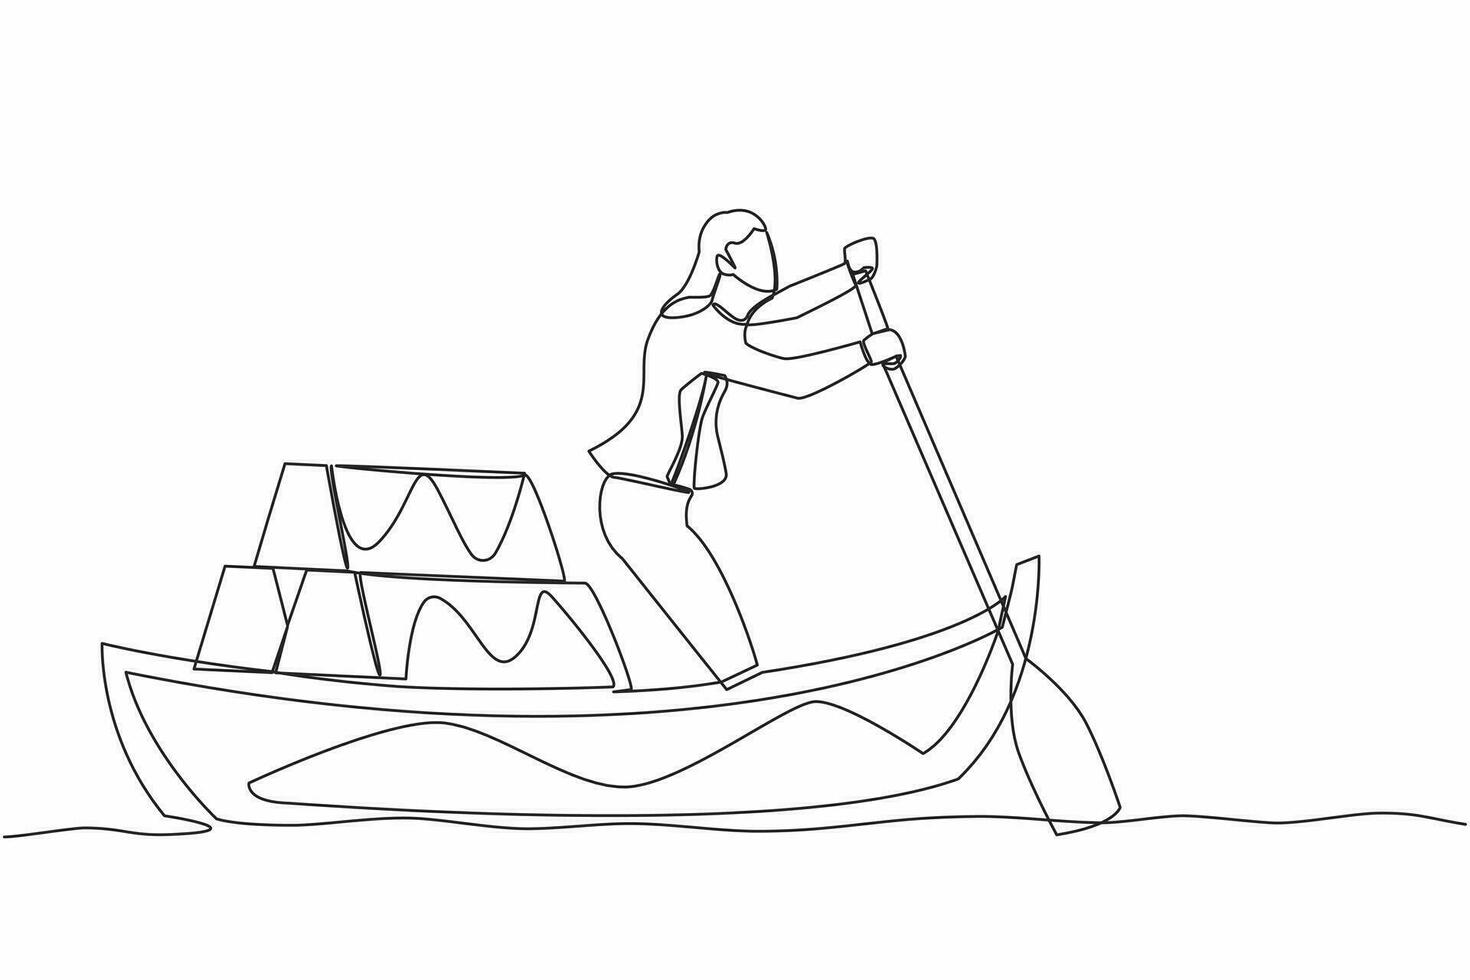 Continuous one line drawing businesswoman sailing away on boat with stack of golden bullion. Gold investment concept. Office worker planning future finance. Single line draw design vector illustration